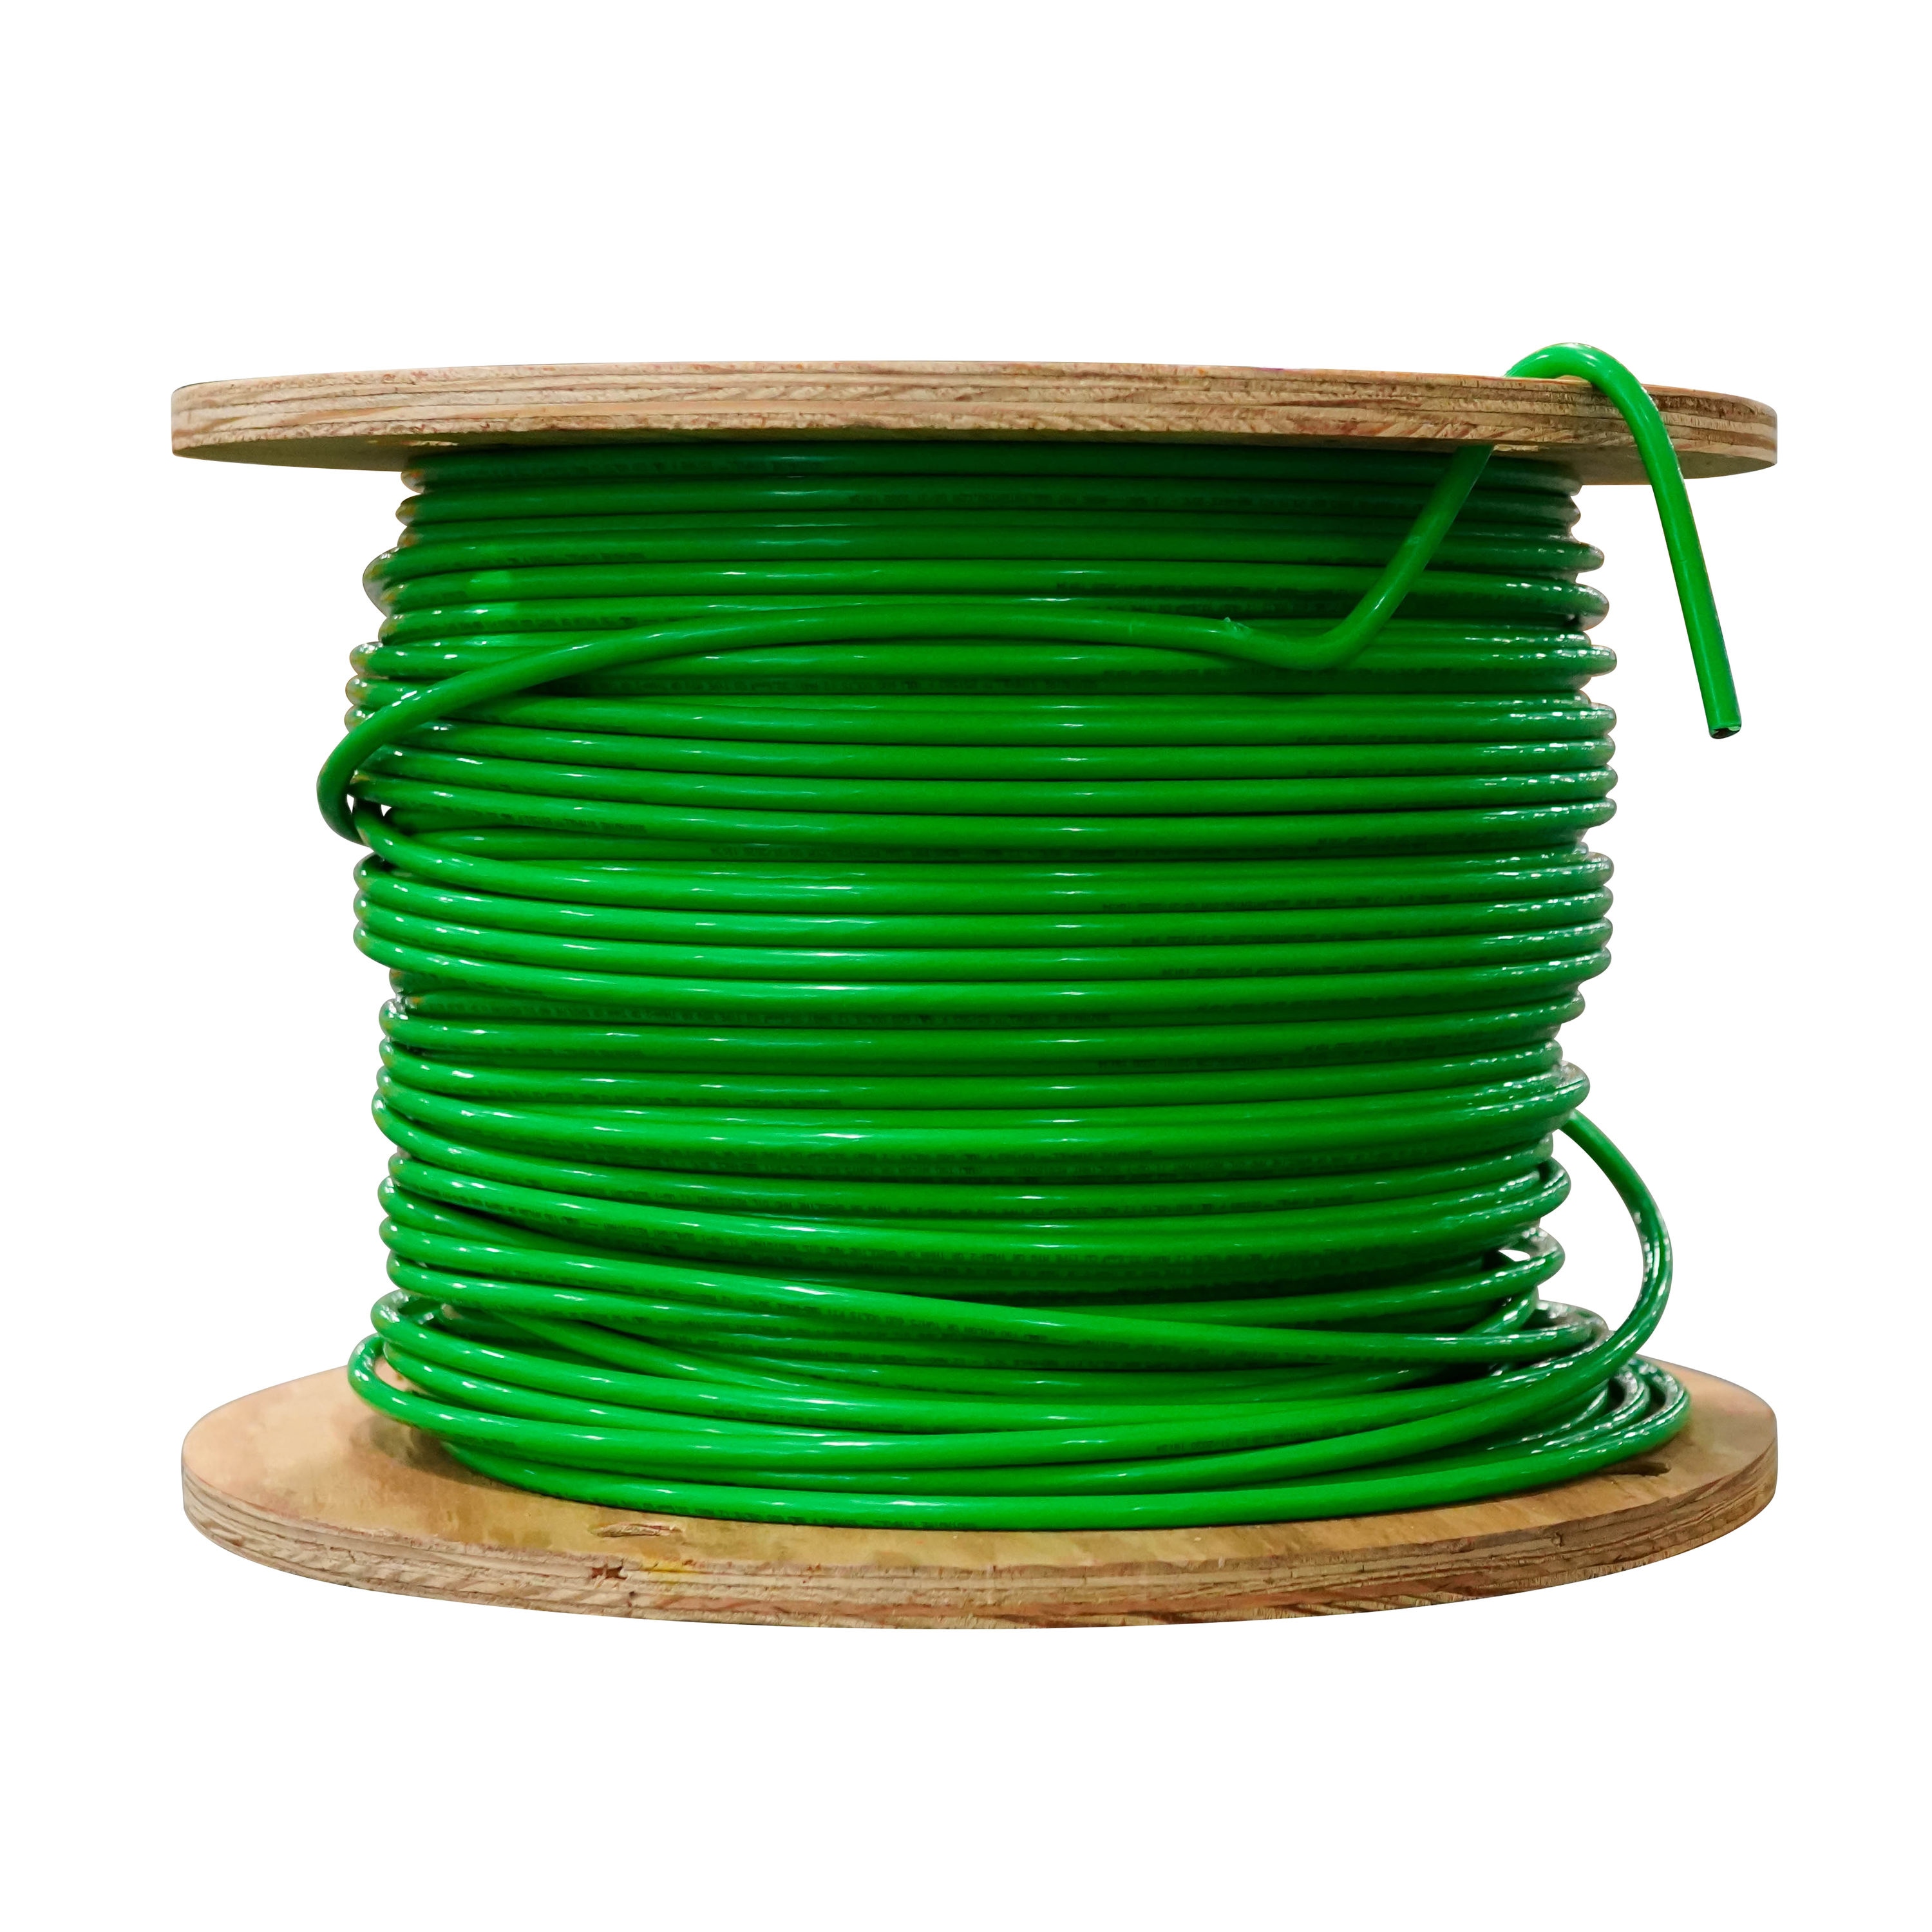 Southwire SIMpull 1000-ft 2-AWG Stranded Green Copper Thhn Wire